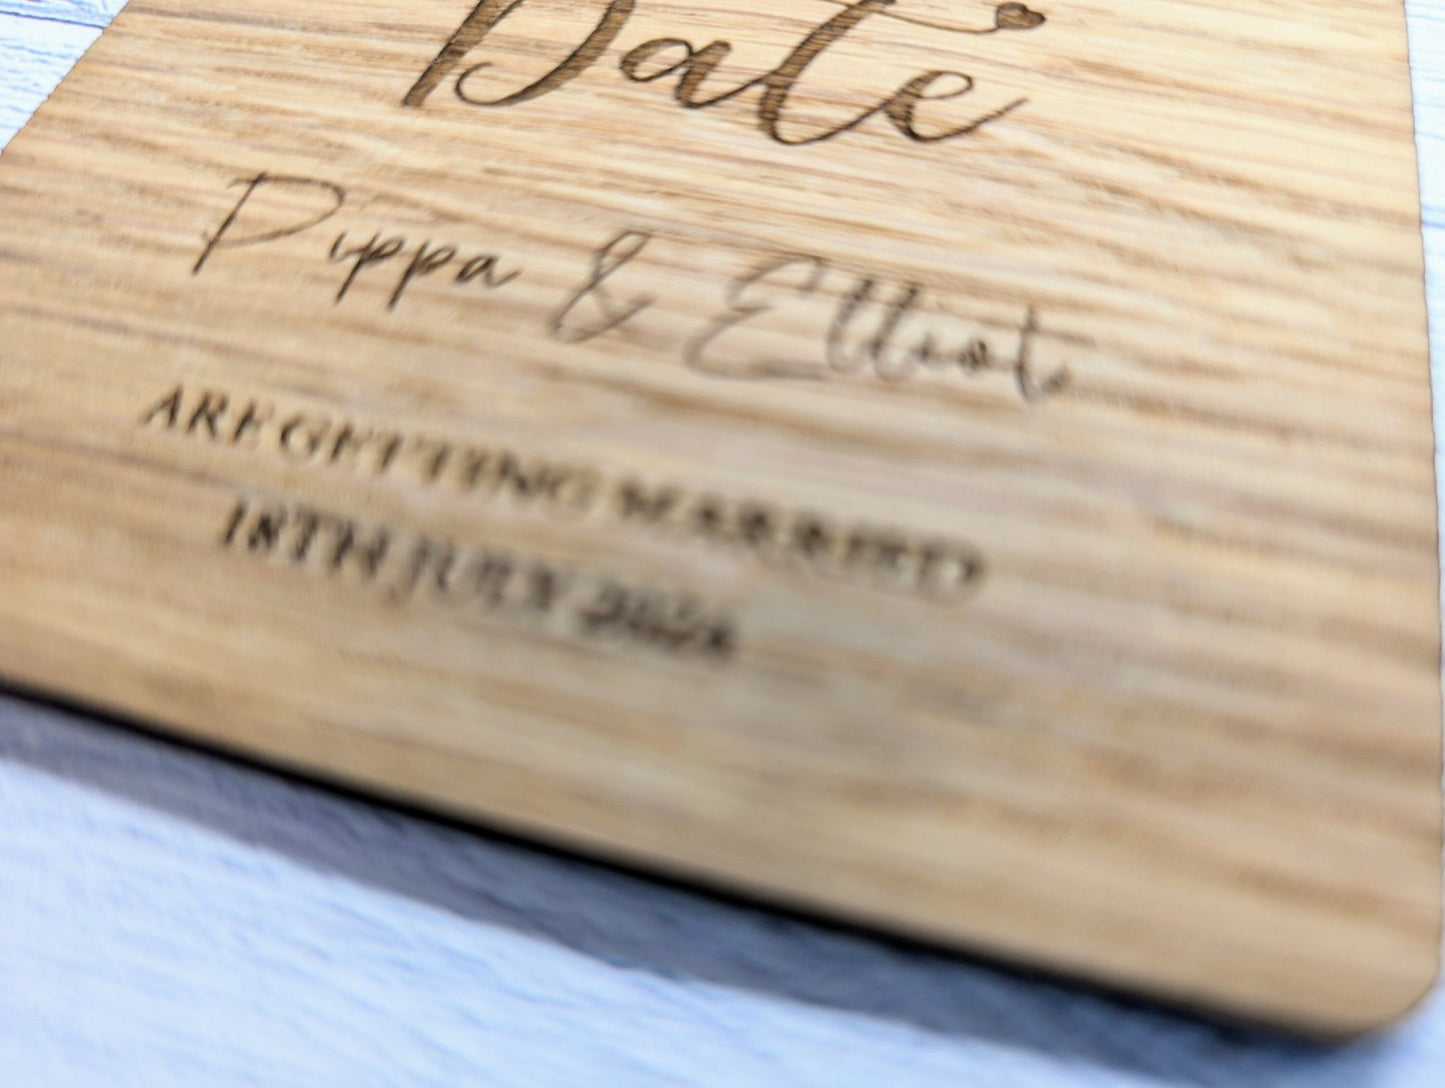 Bespoke 'Save The Date' Oak Veneered Coasters - Custom with Names & Date, 90mm x 90mm, Unique Personalised Wooden Wedding Favours - CherryGroveCraft